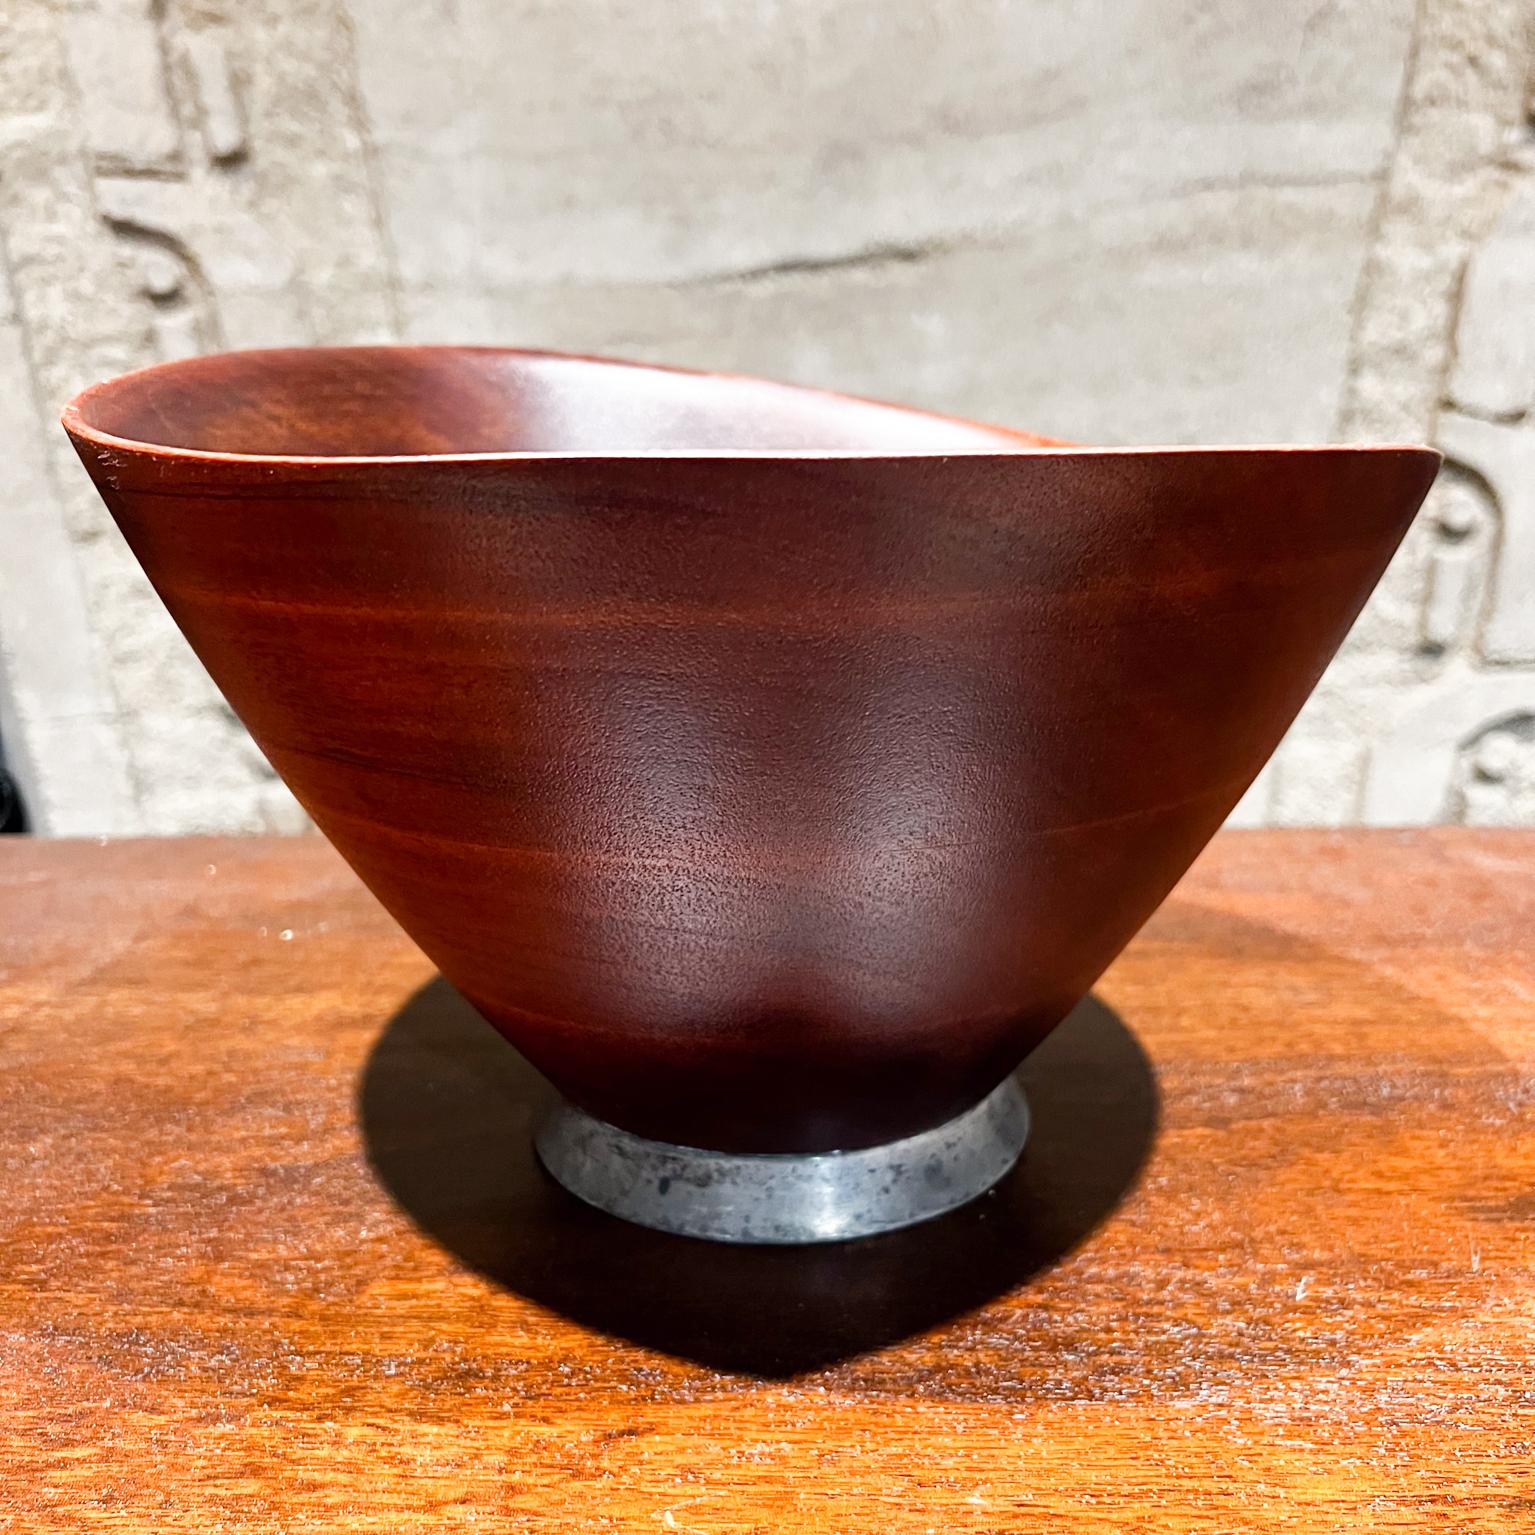 1970s Modern Mahogany Wood and Silver Bowl
Web Silver Philadelphia stamped
11.25 diameter x 7.75 tall
Preowned Original vintage condition.
See all images.
